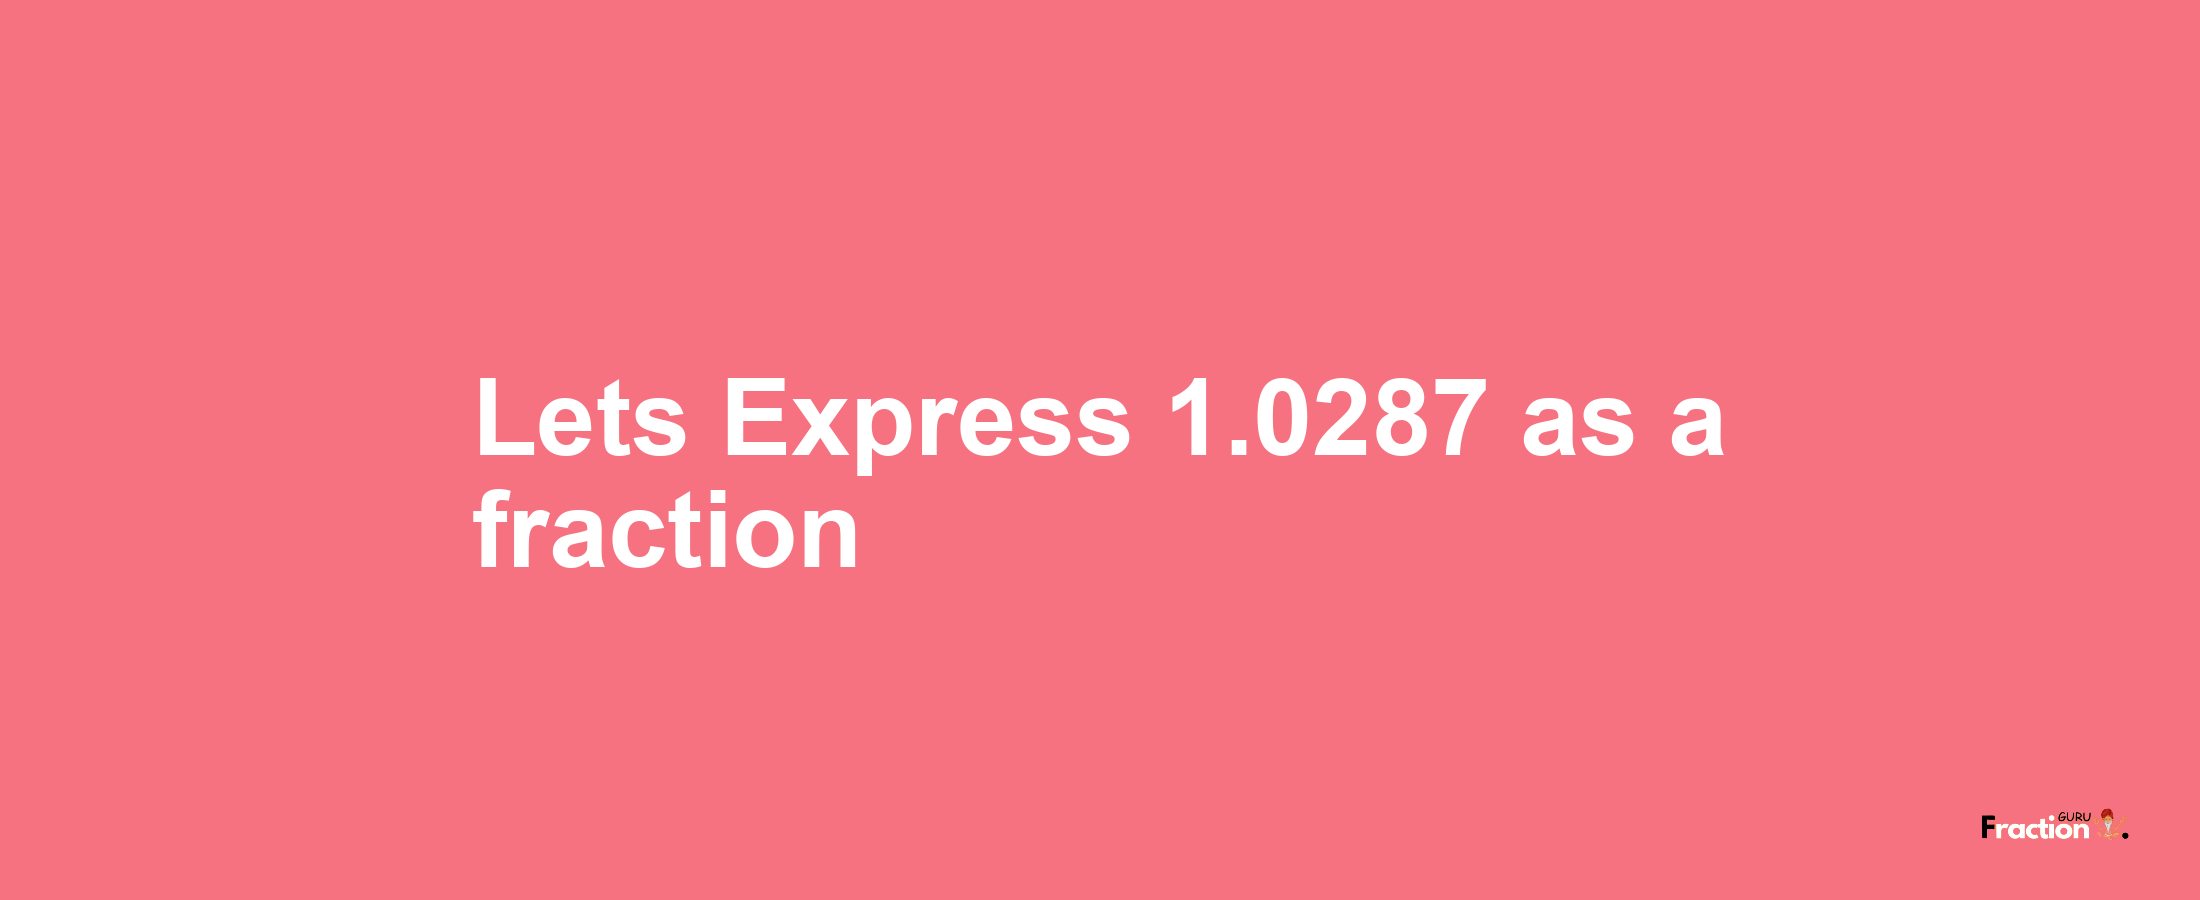 Lets Express 1.0287 as afraction